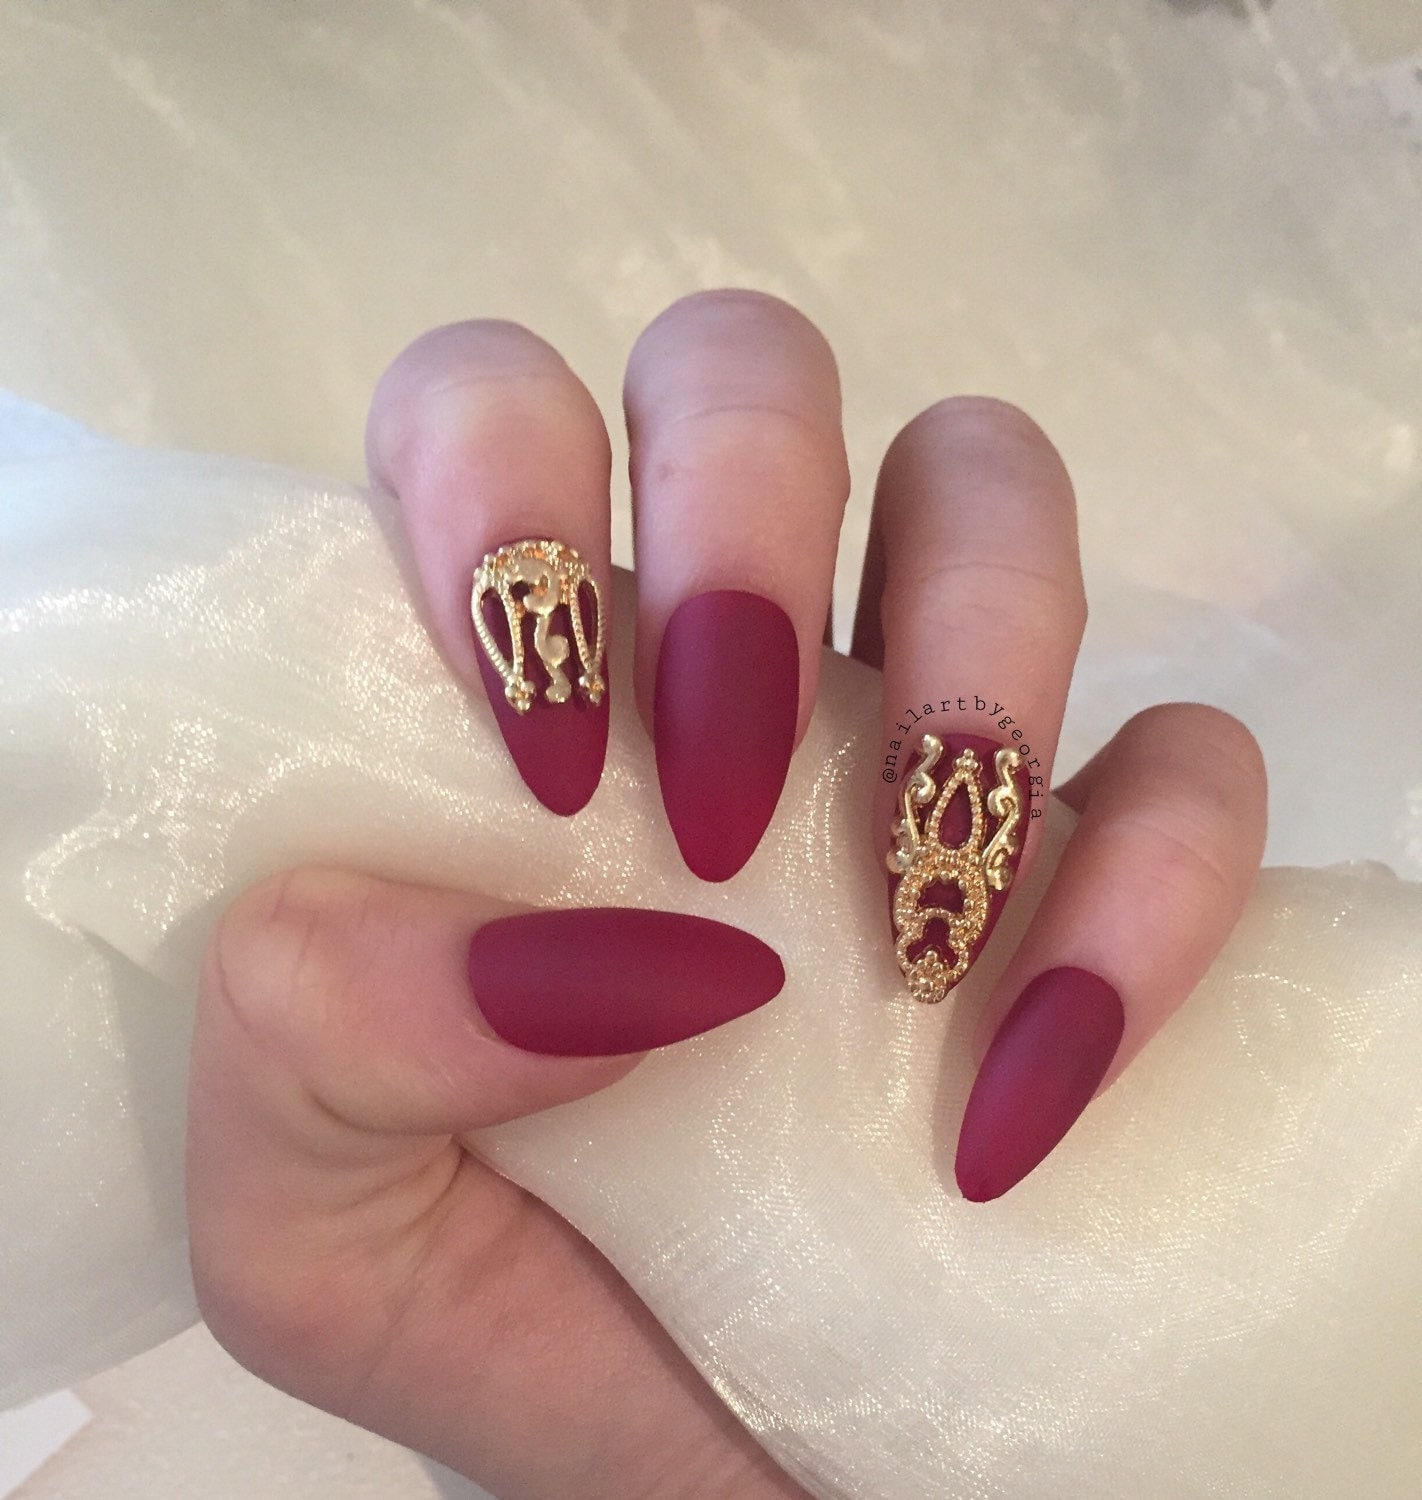 Red Matte Nails With Gems Nail Art Is The Perfect Way To Express